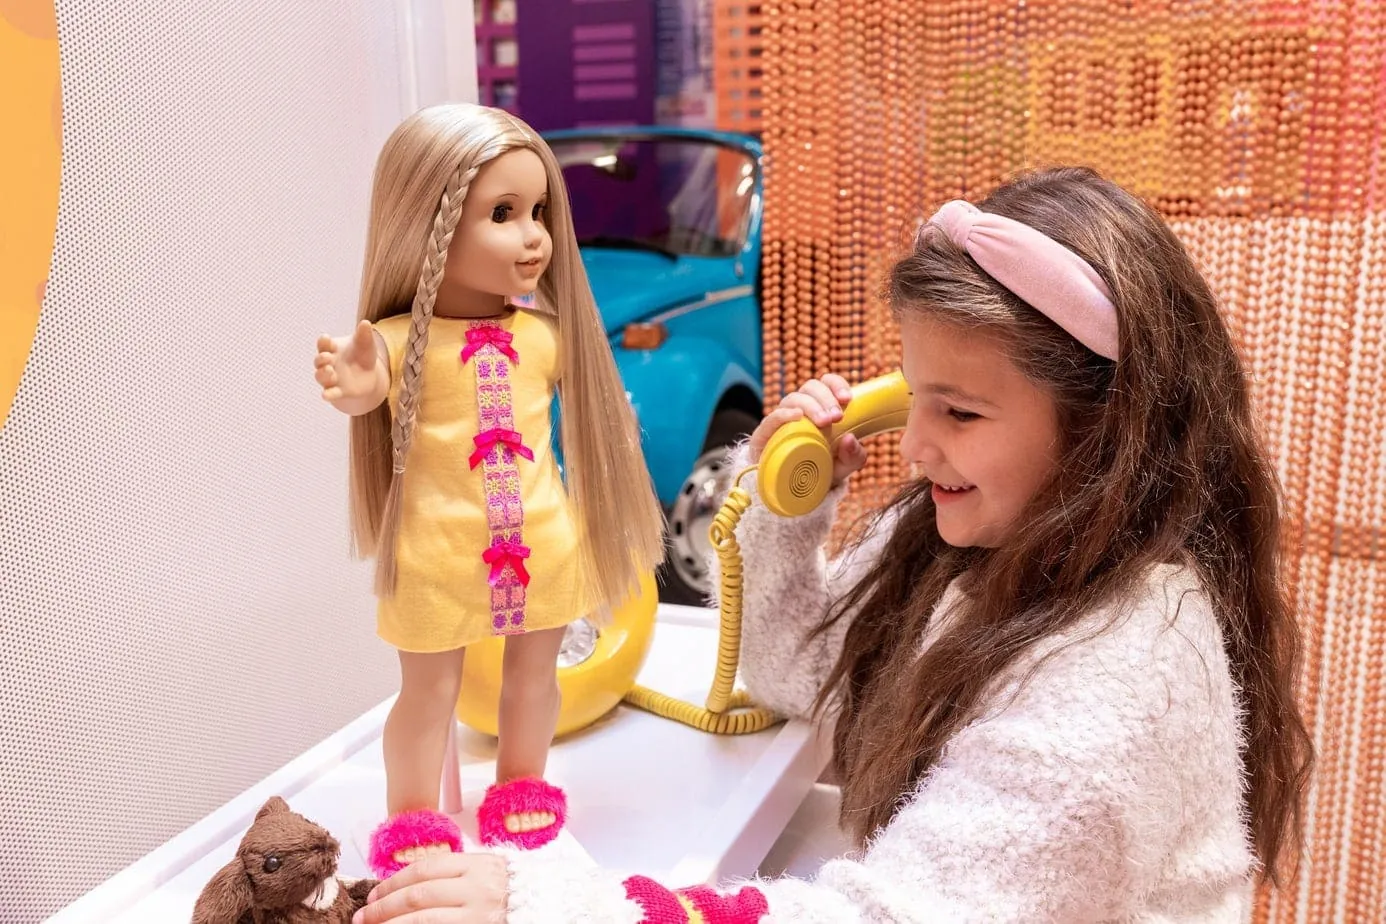 Daughter playing with dolls a the American Girl Doll store in NYC